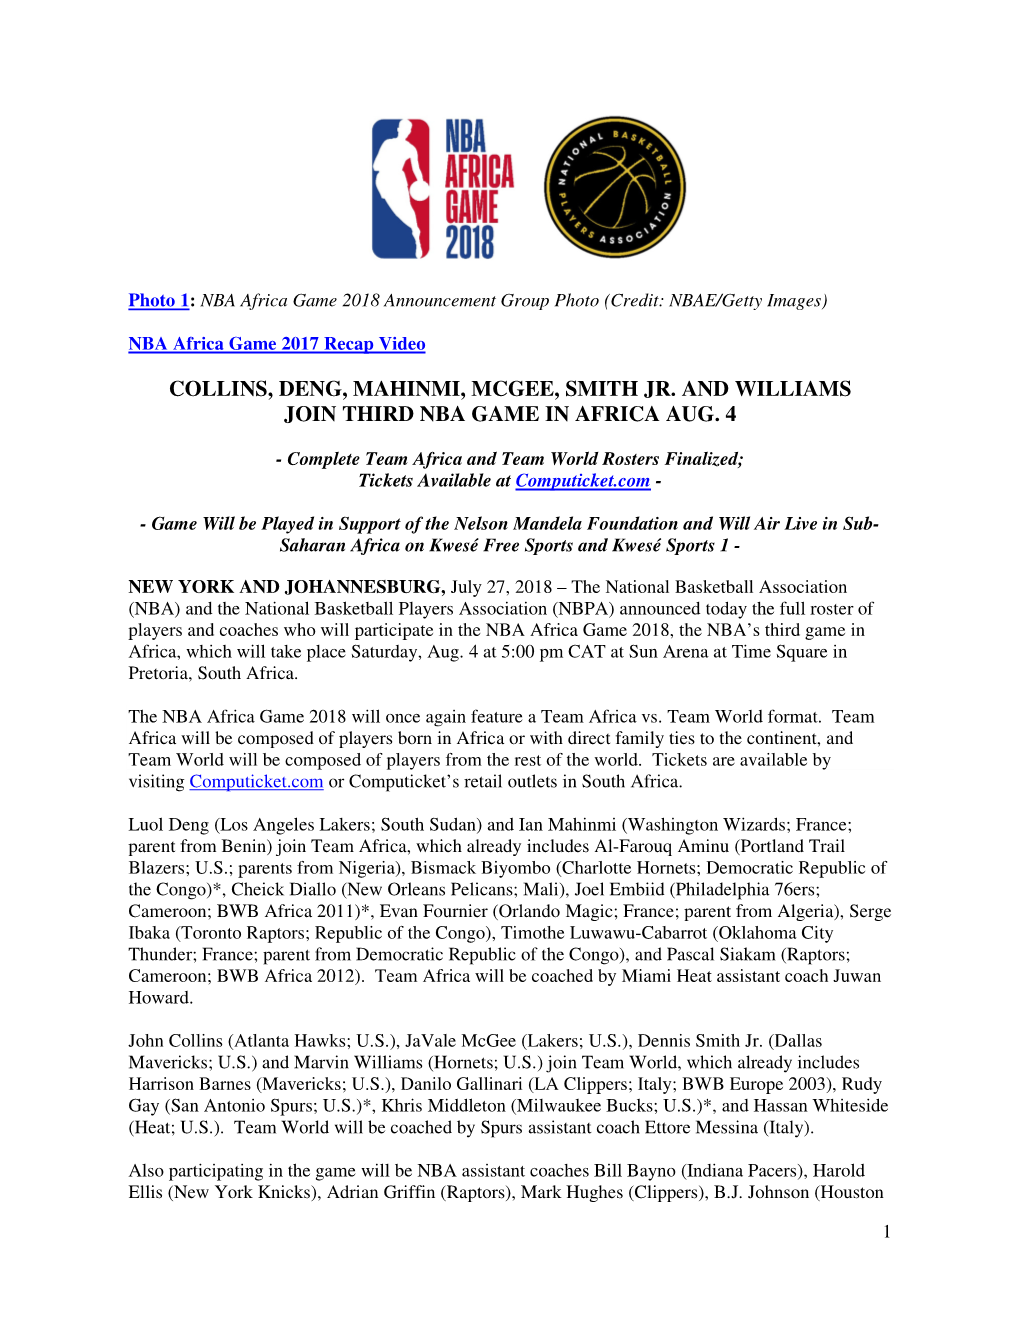 Collins Participating in NBA Africa Game